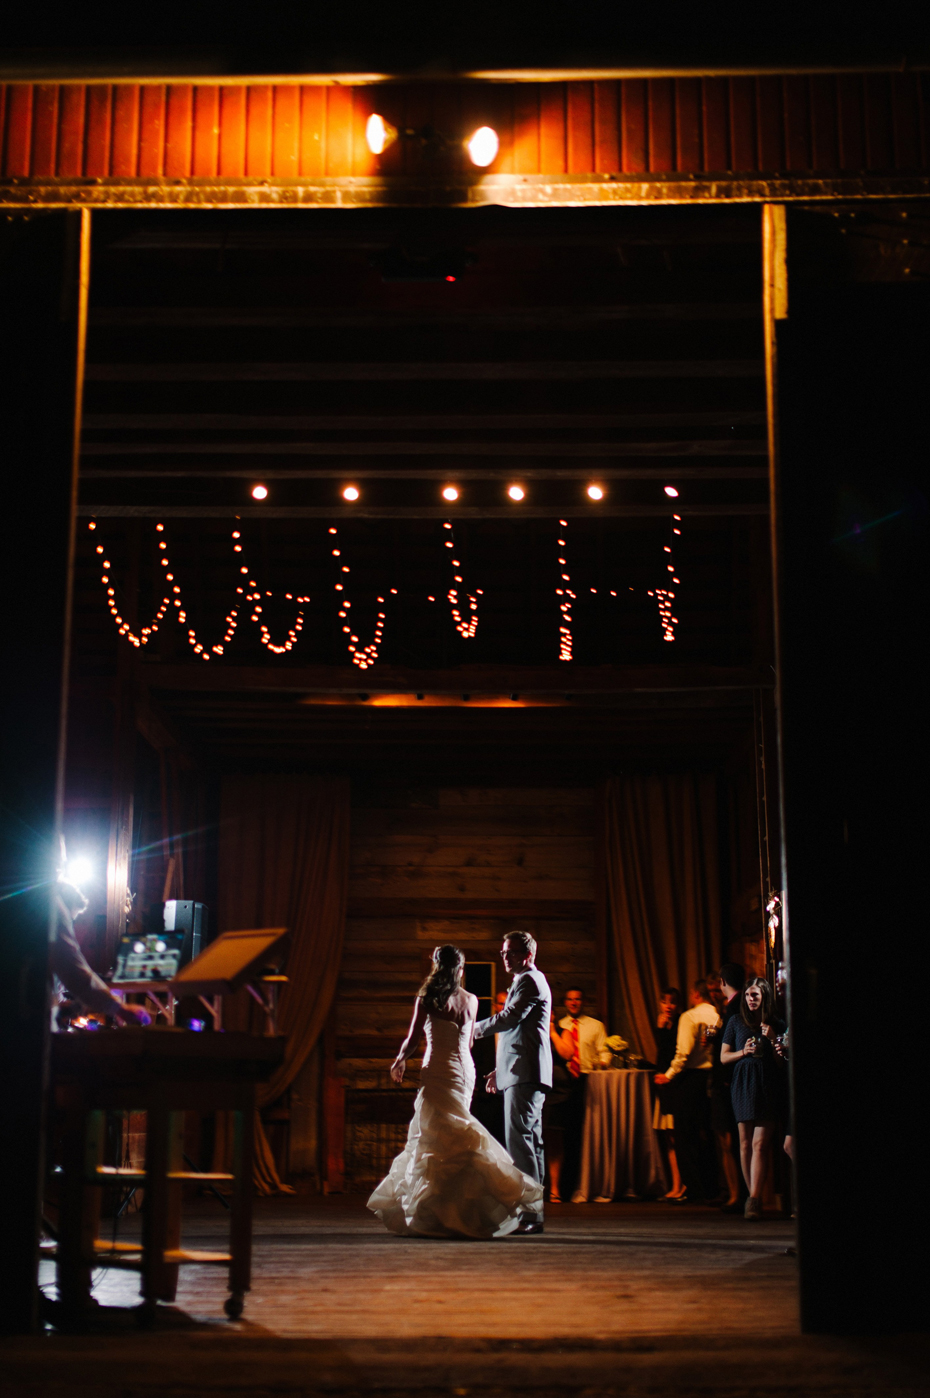 Bride and groom share a first dance in the barn at a wedding reception at Misty Farms by photojournalistic Michigan wedding photographer Heather Jowett.